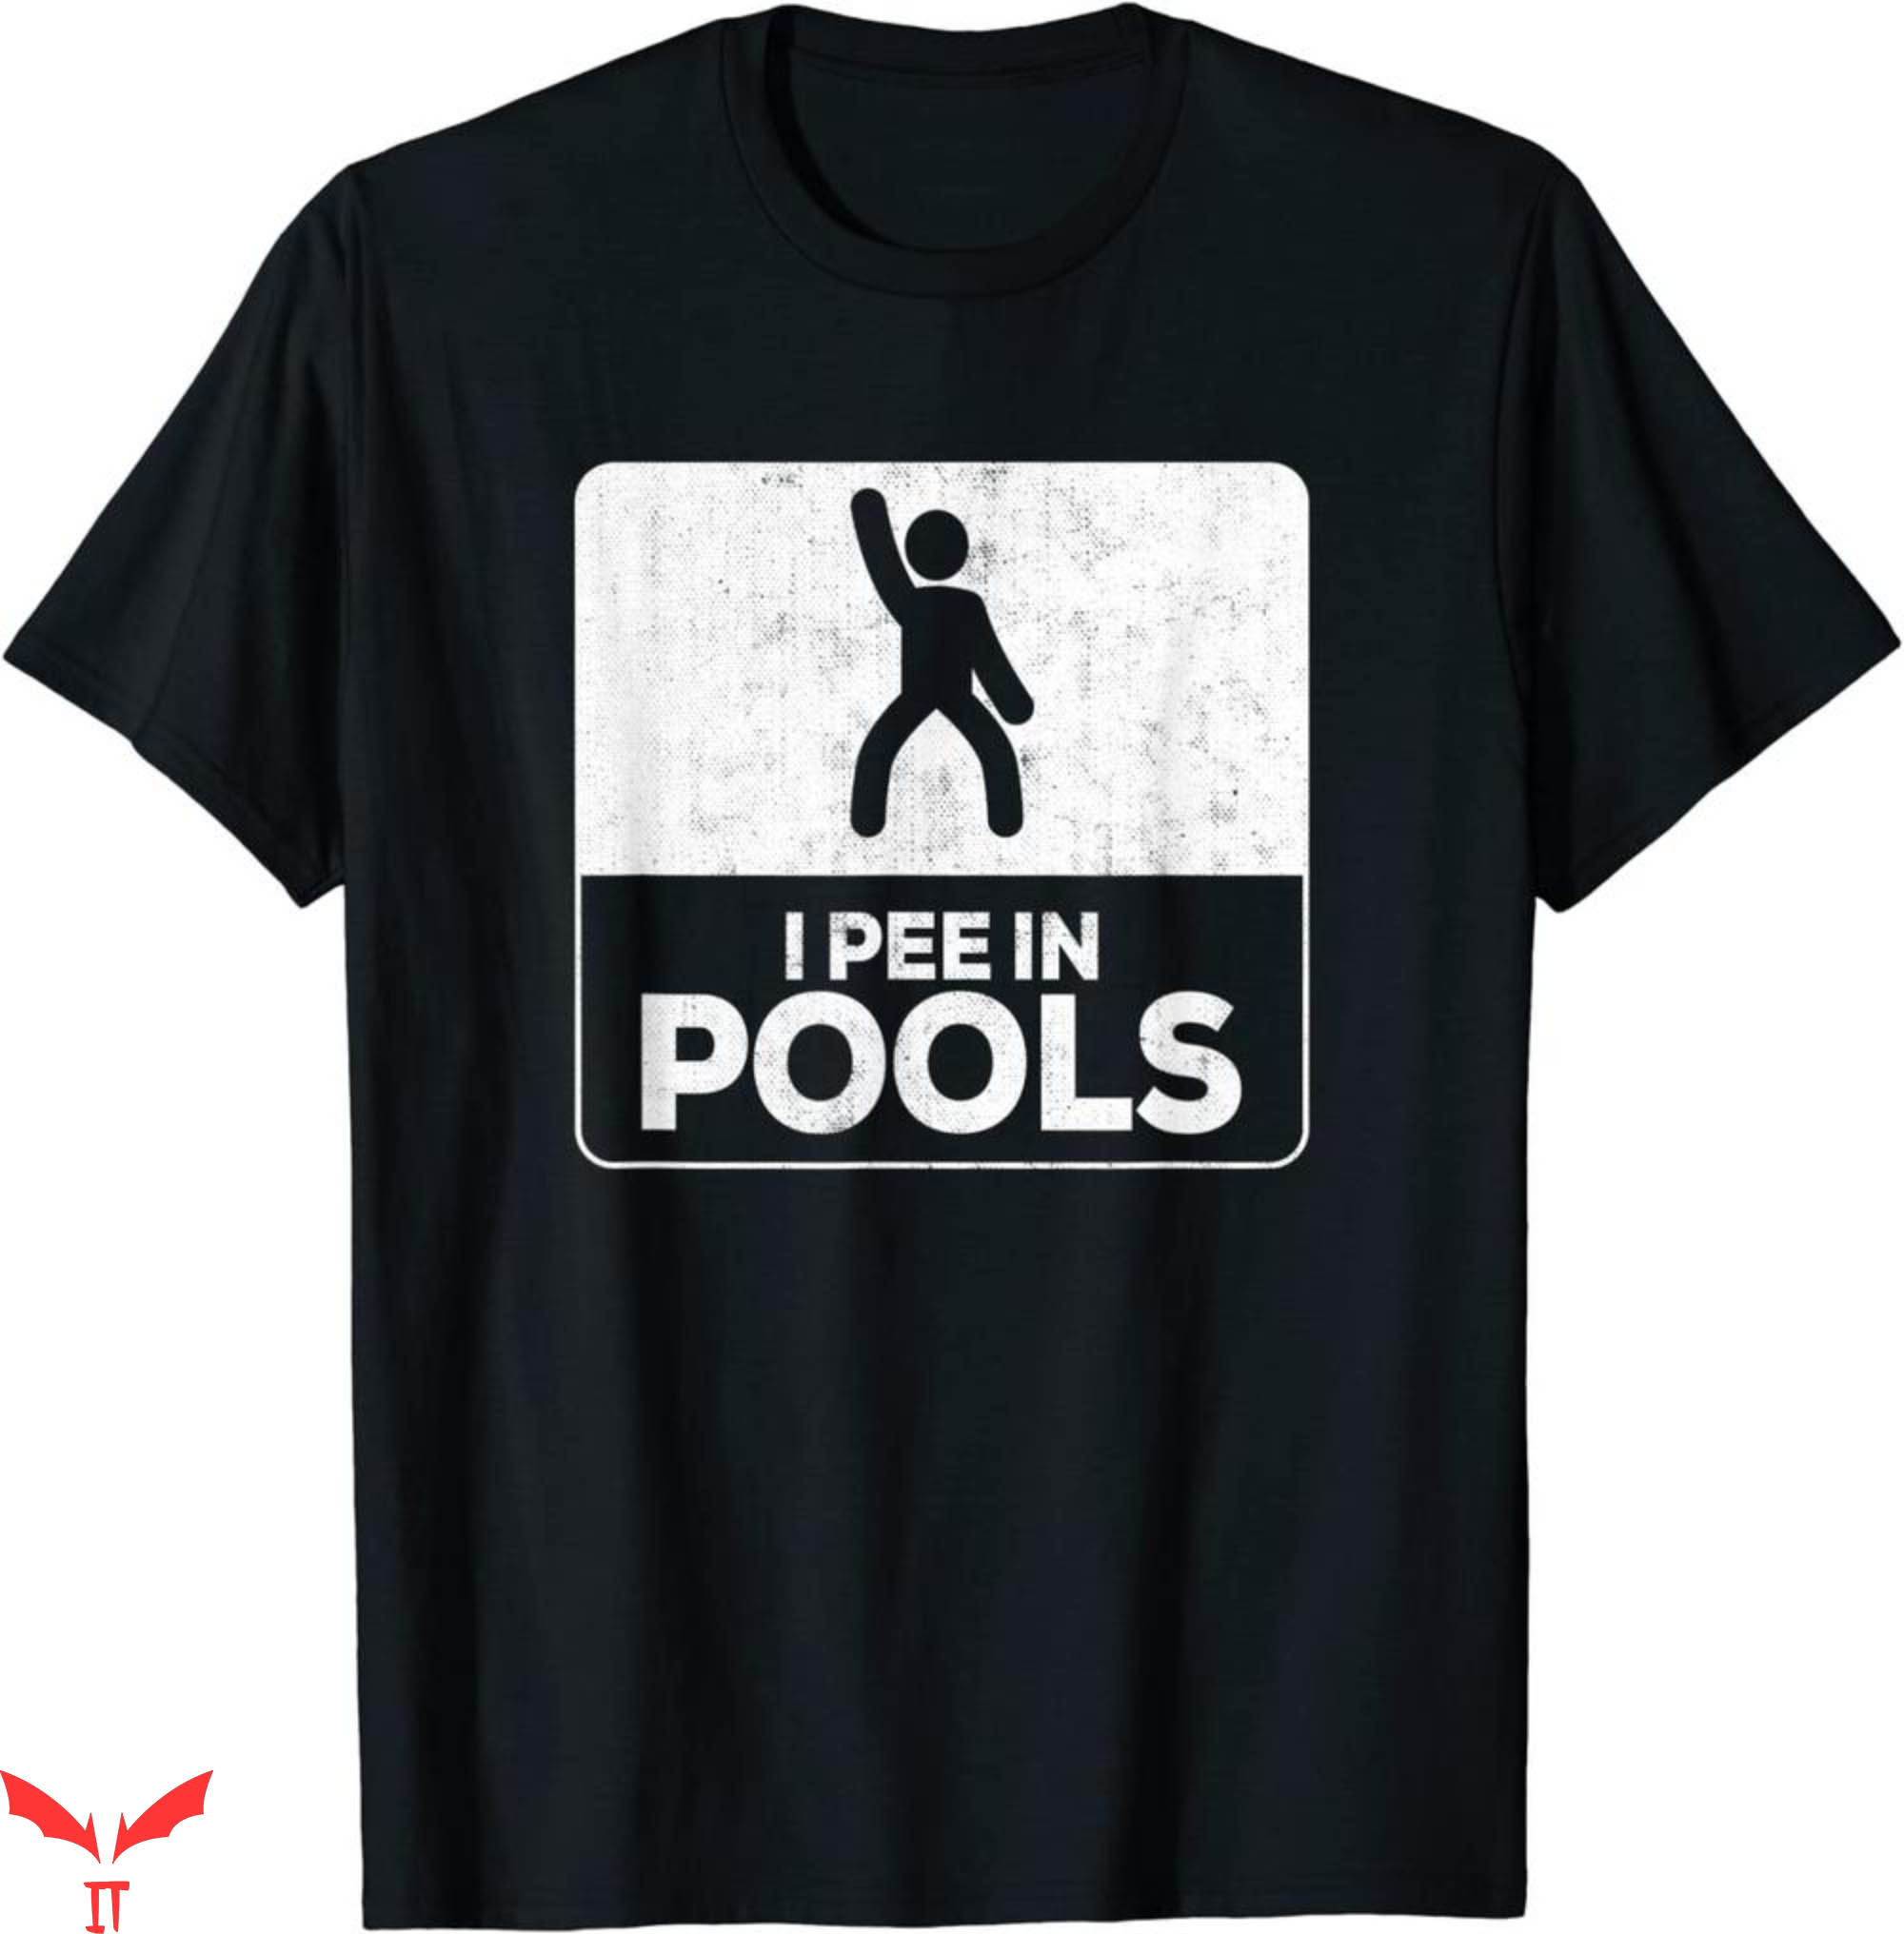 I Pee In Pools T-Shirt Funny And Sarcastic Trendy Meme